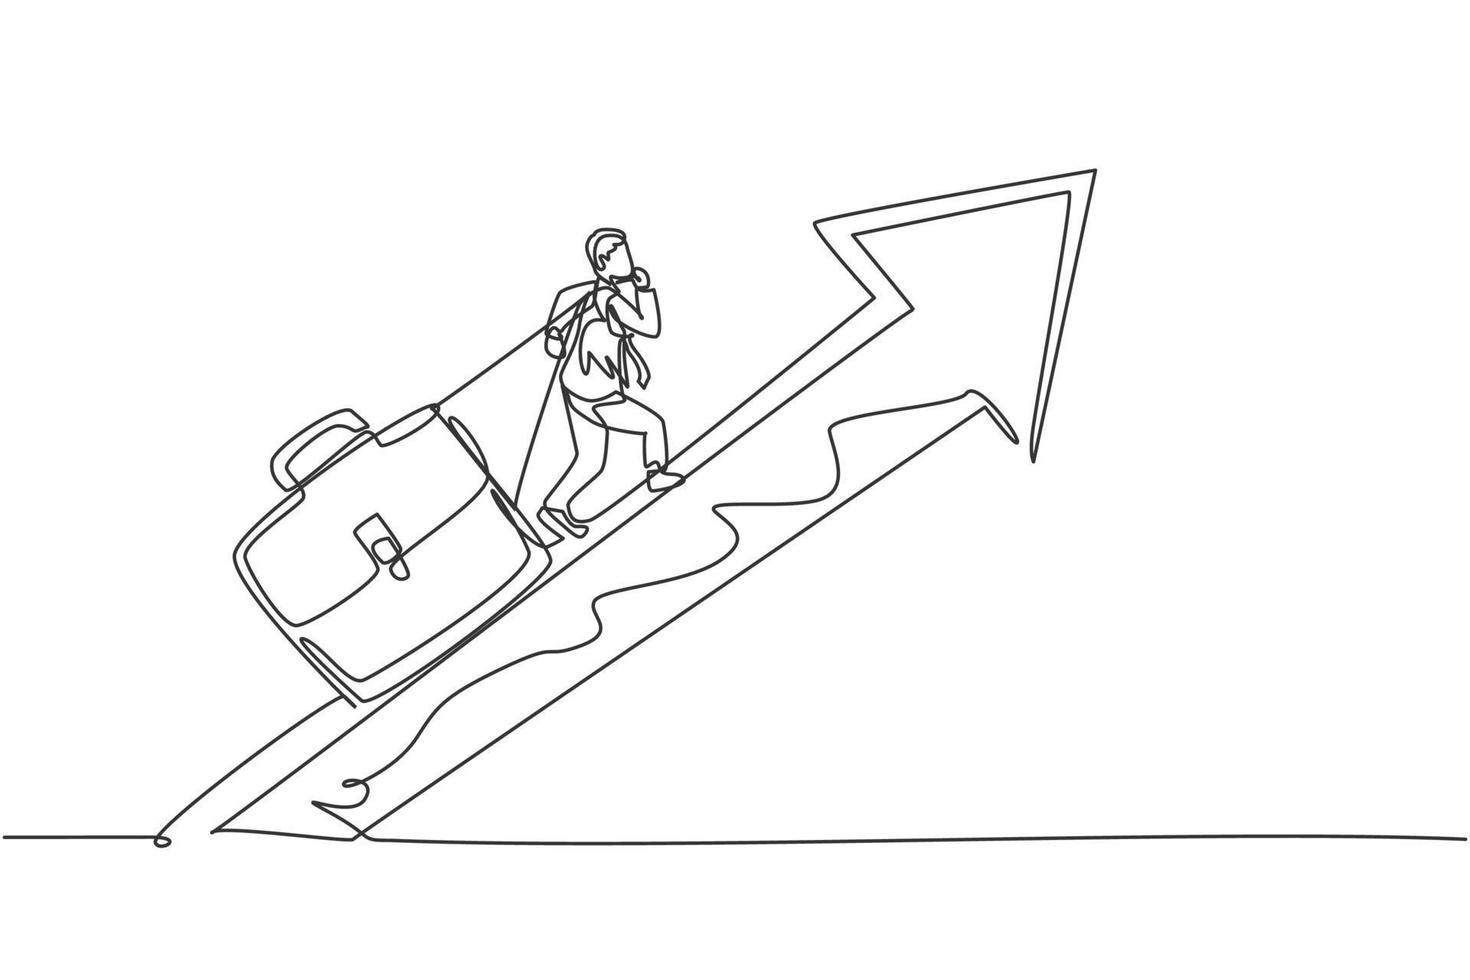 Single one line drawing of young male hard worker pulling briefcase up to the rising arrow. Business financial growth minimal concept. Modern continuous line draw design graphic vector illustration